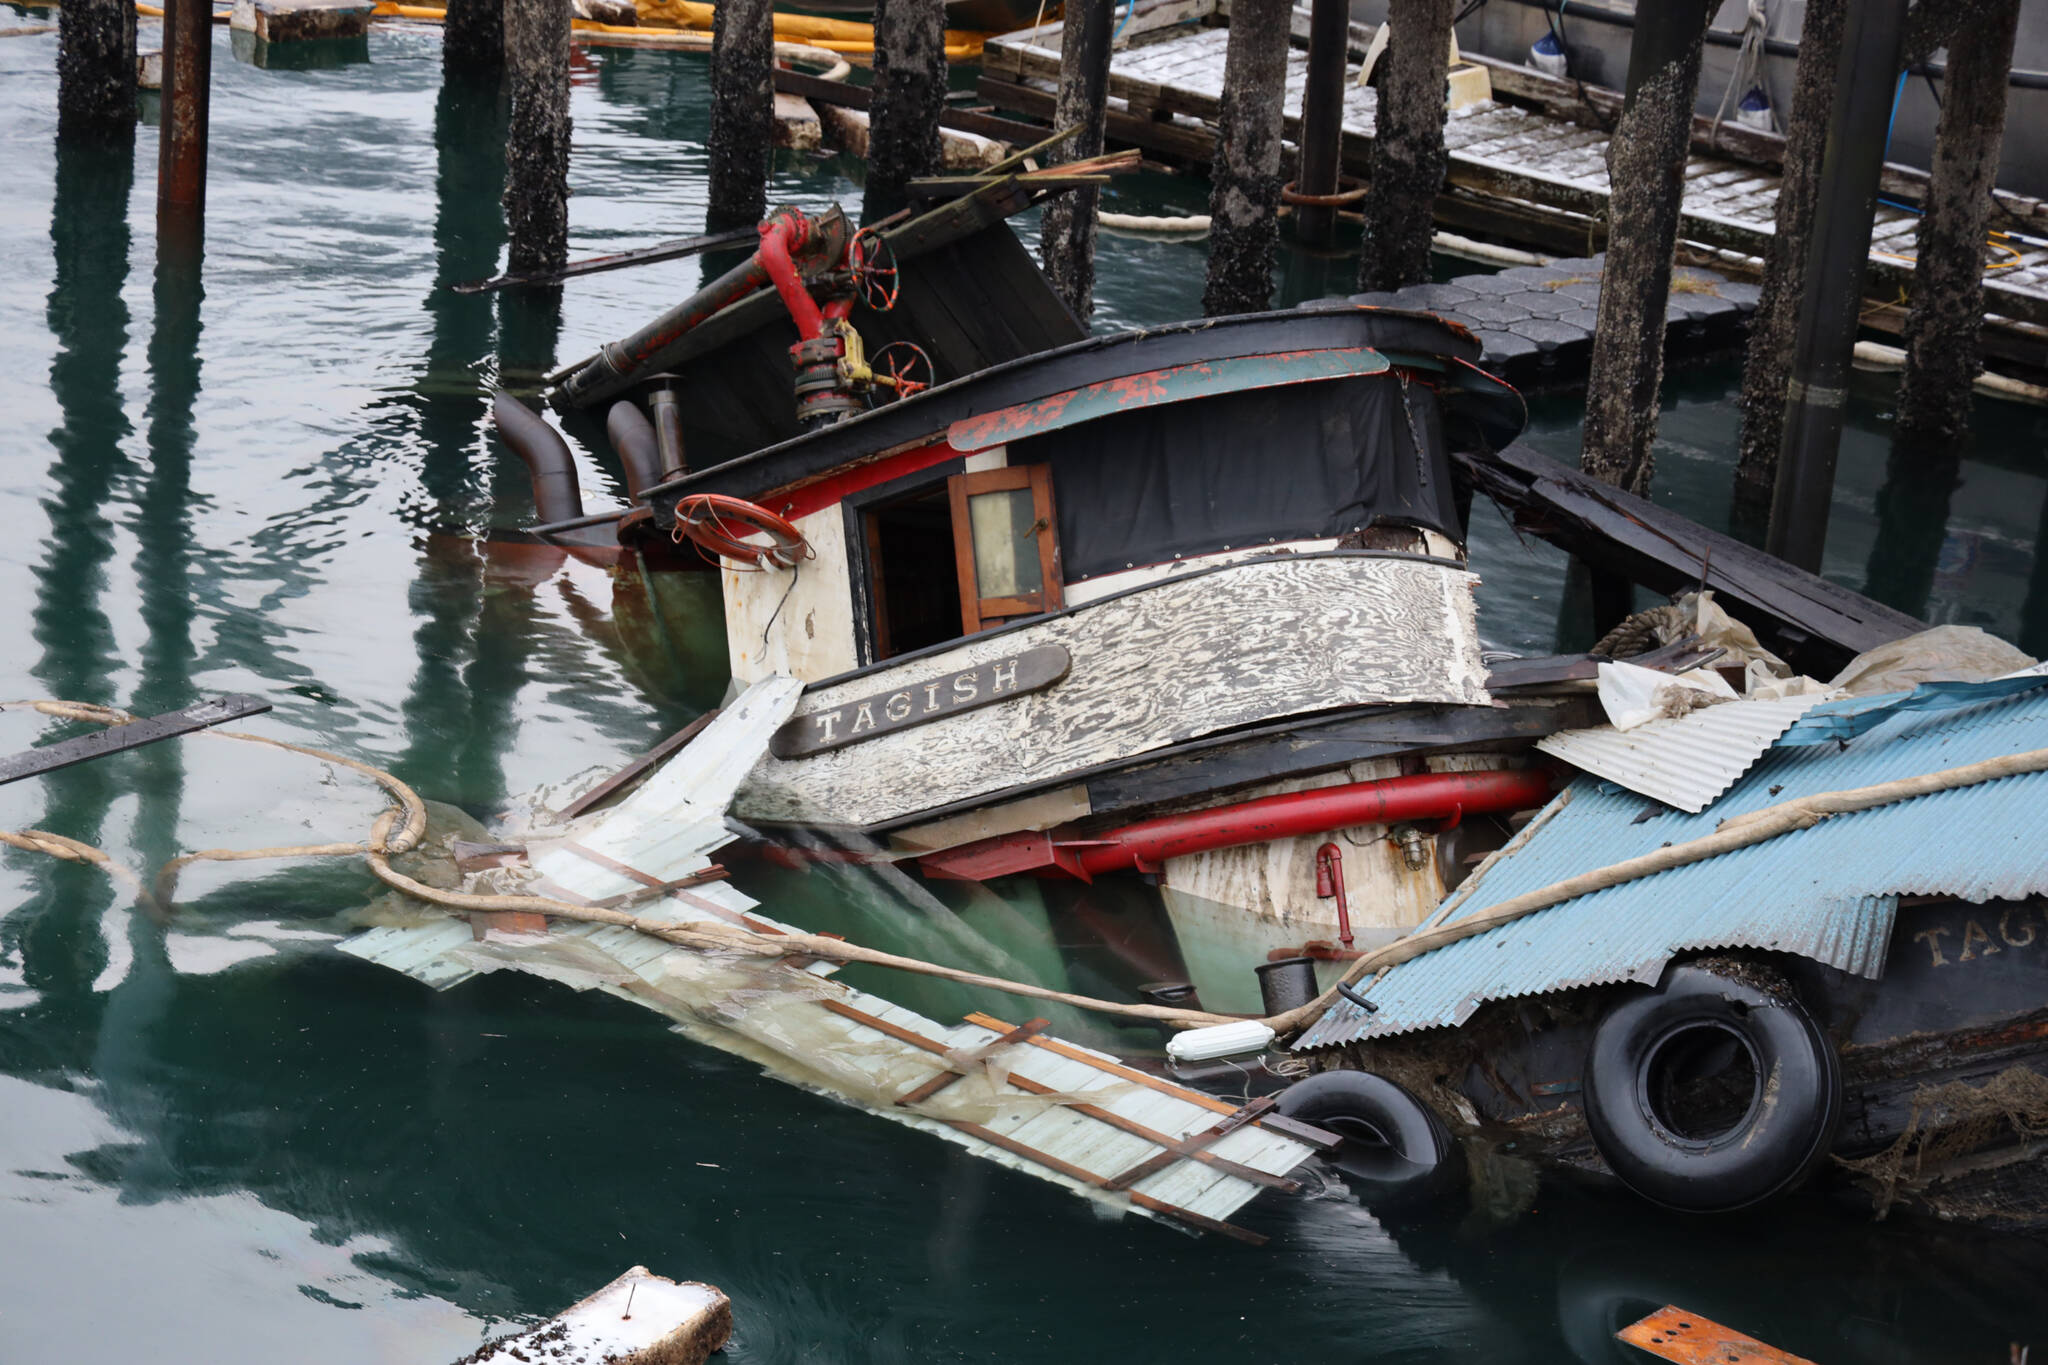 The privately owned 107-foot tugboat, the Tagish, sits partially below the water south of the downtown cruise ship docks Thursday morning as recovery efforts begin by the Coast Guard. (Clarise Larson / Juneau Empire)